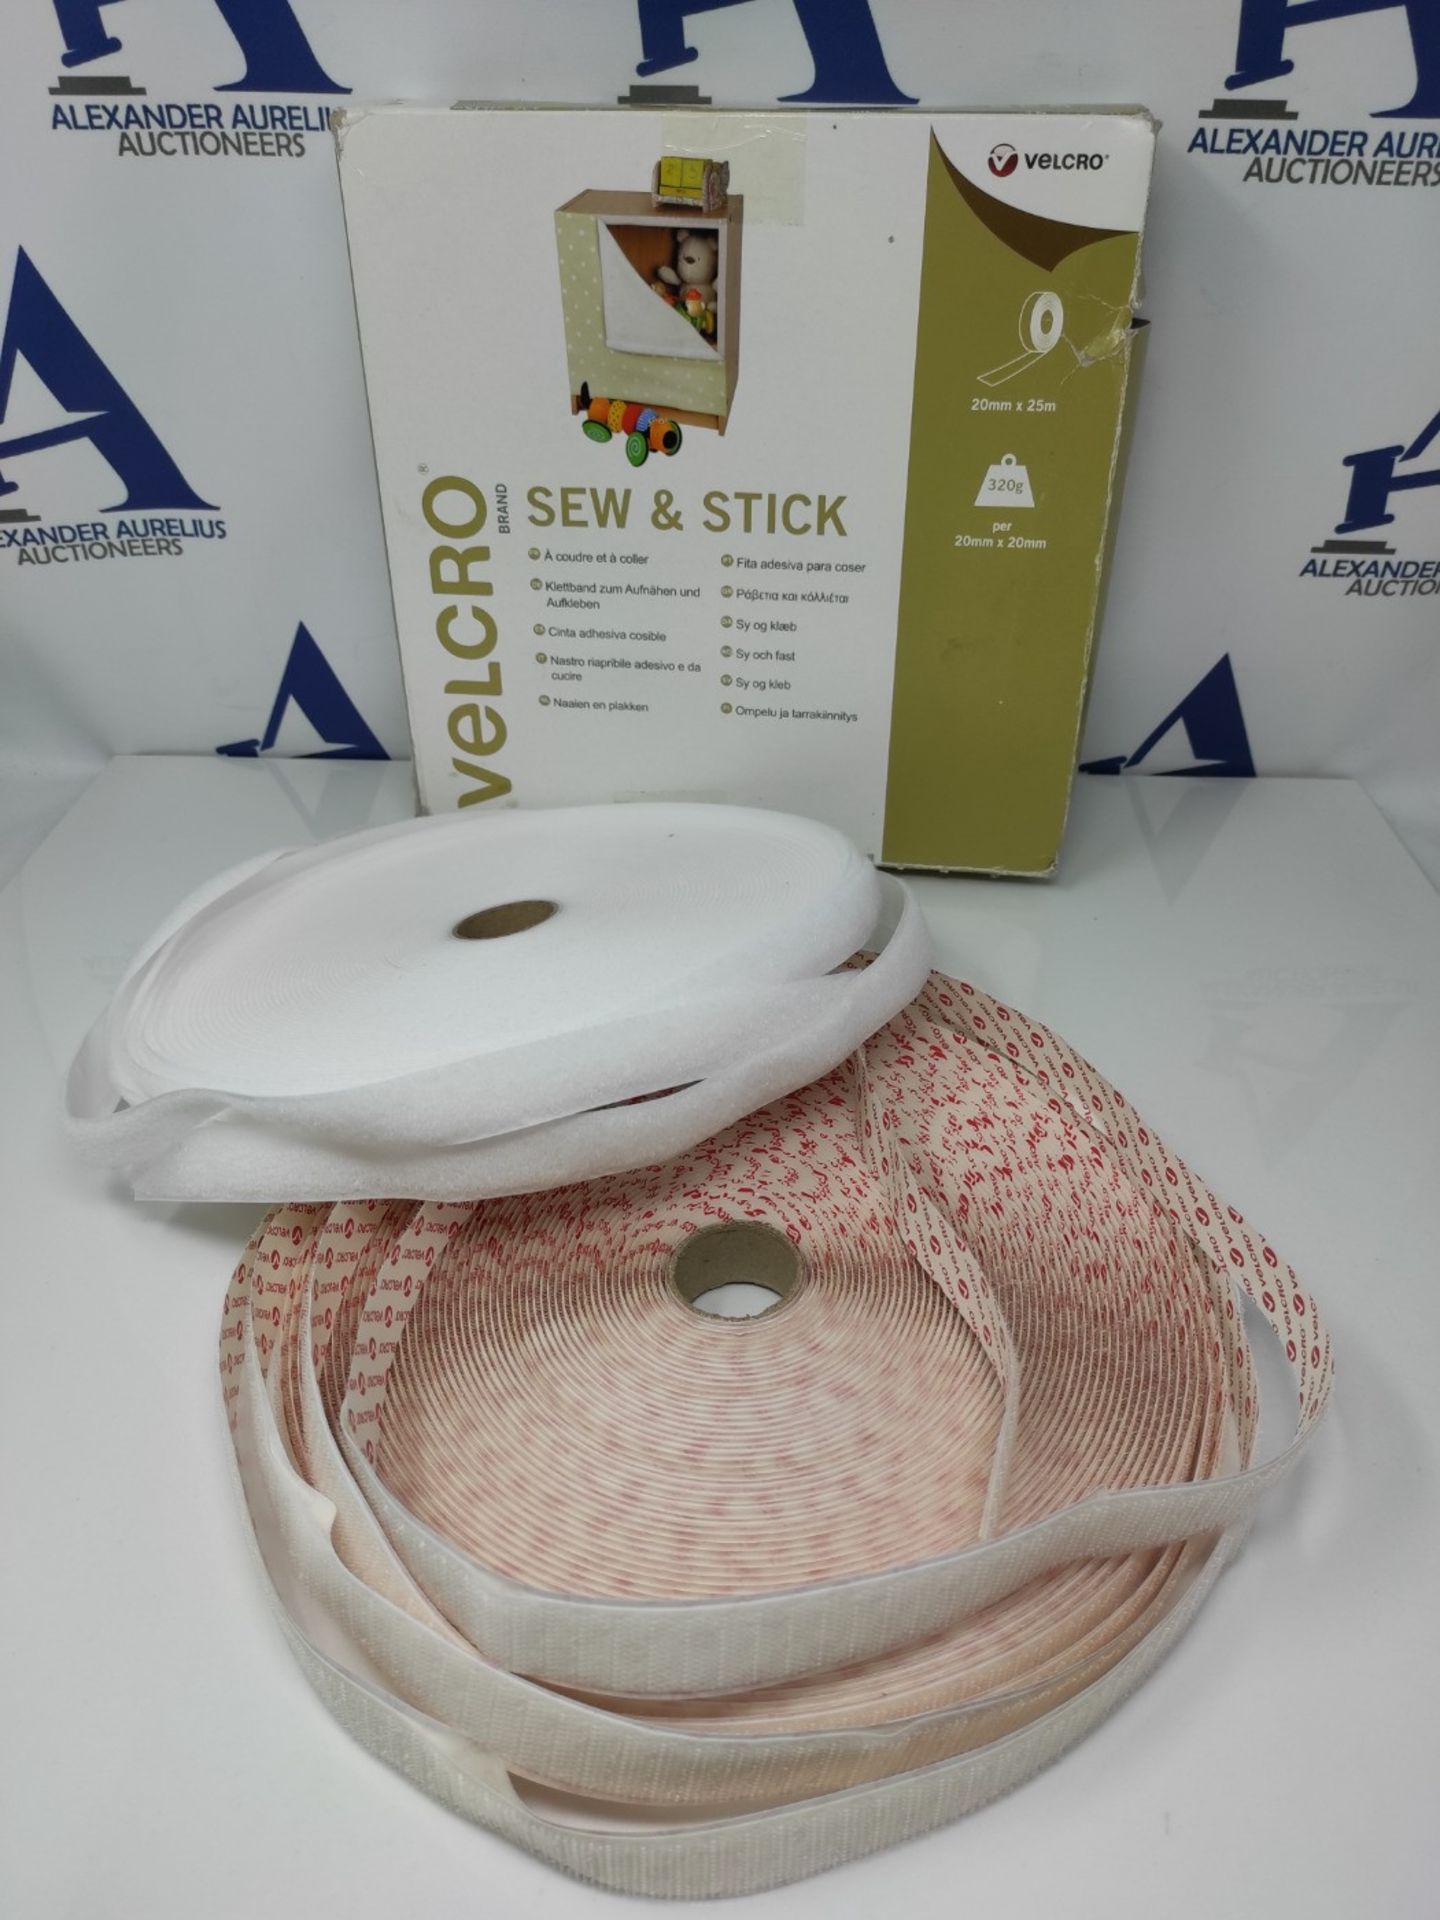 VELCRO® Brand | Sew & Stick Fabric Tape | Cut-to-Length Strong Hook & Loop Self Adhes - Image 2 of 2